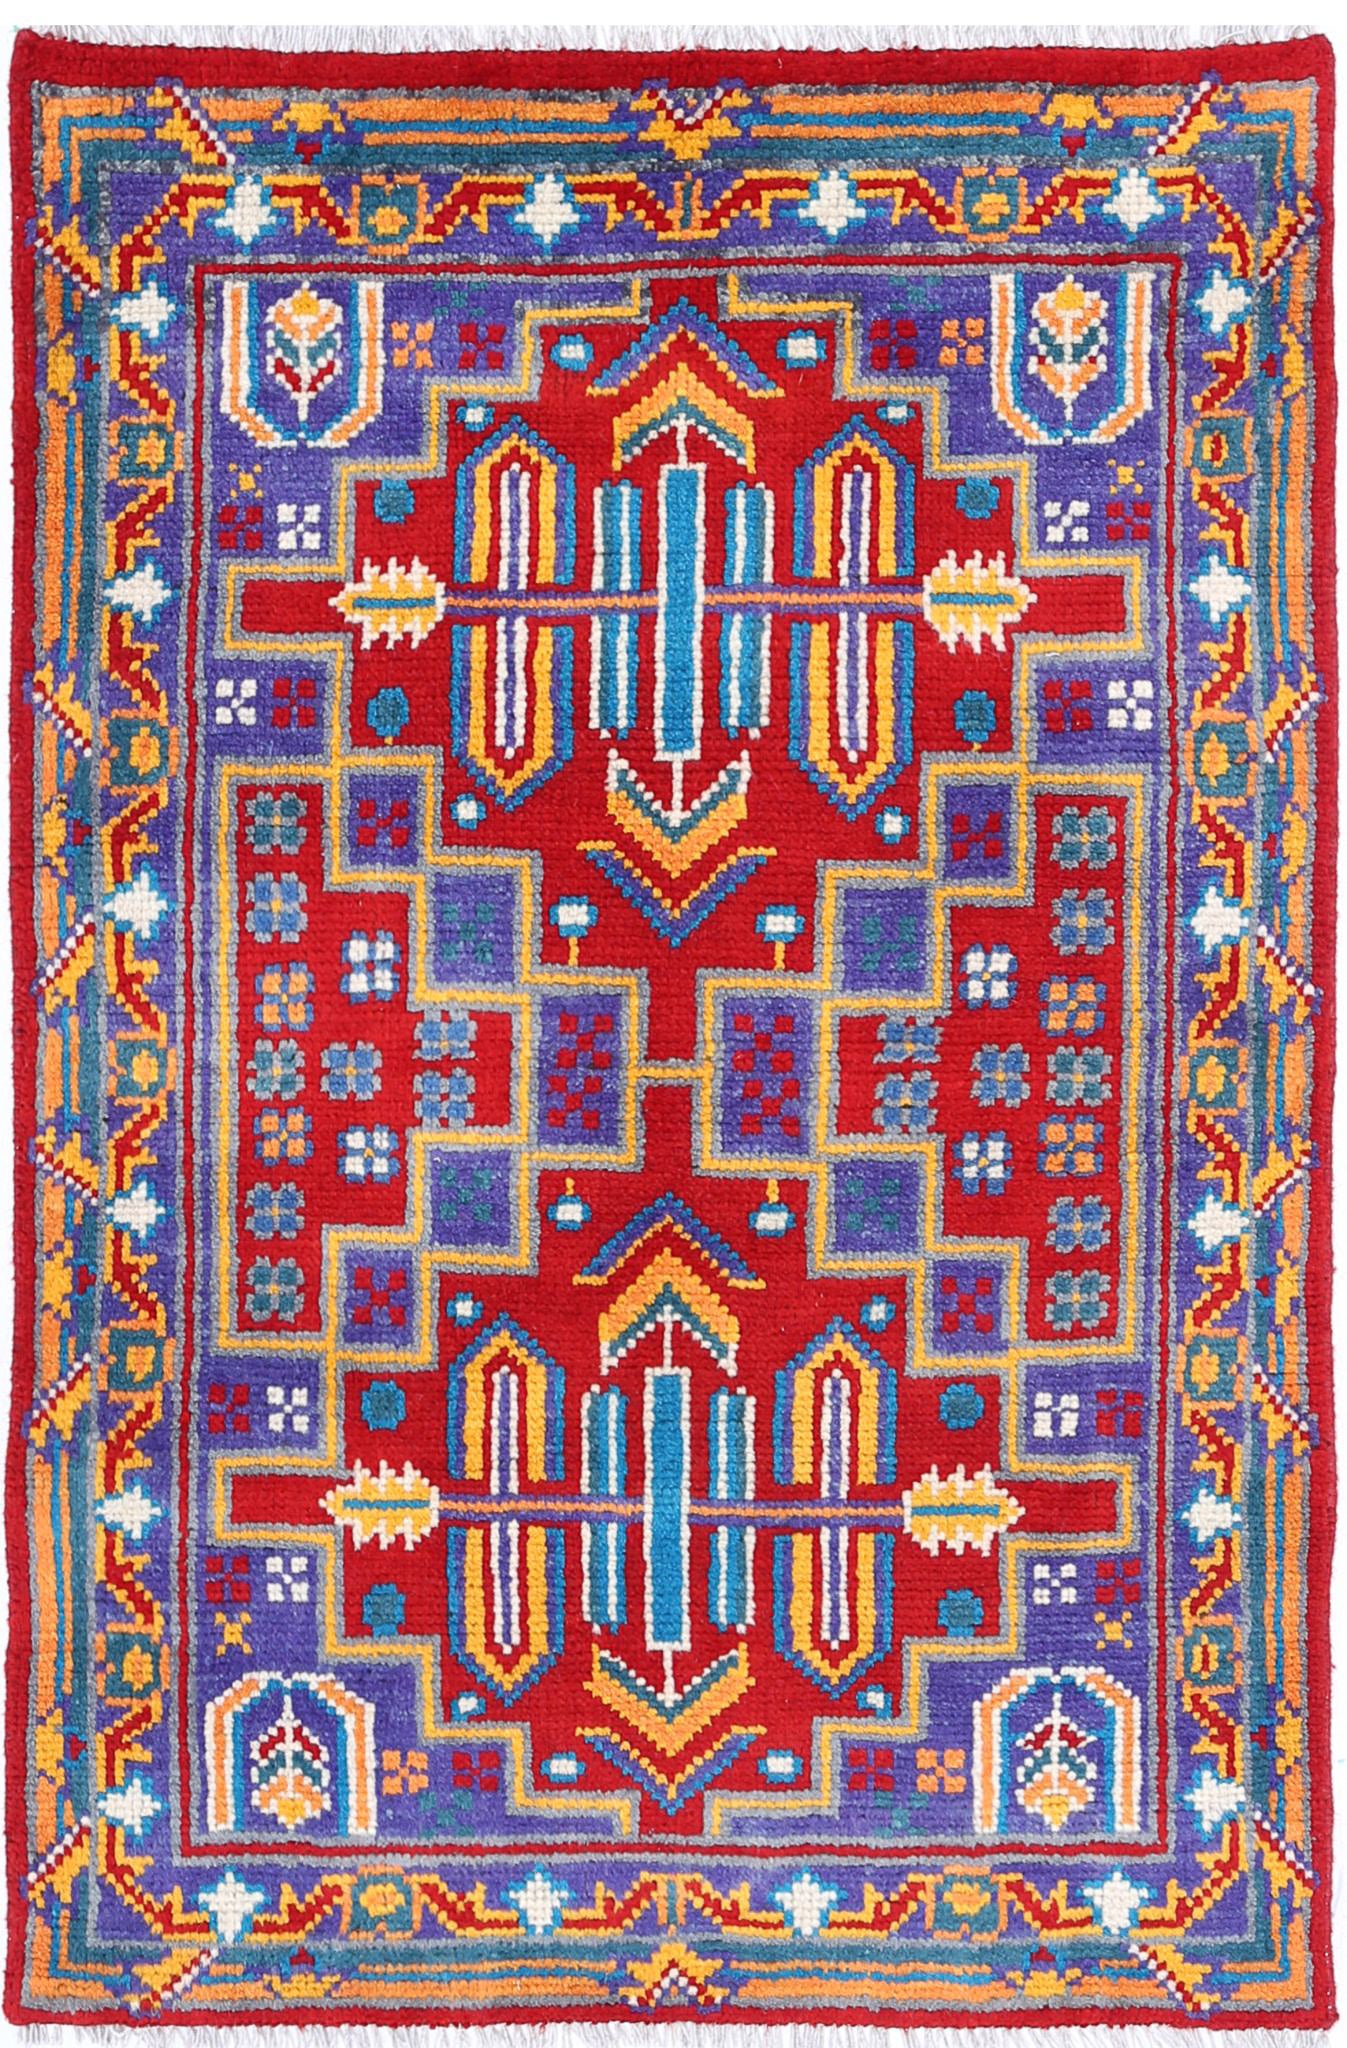 Revival-hand-knotted-qarghani-wool-rug-5014191.jpg